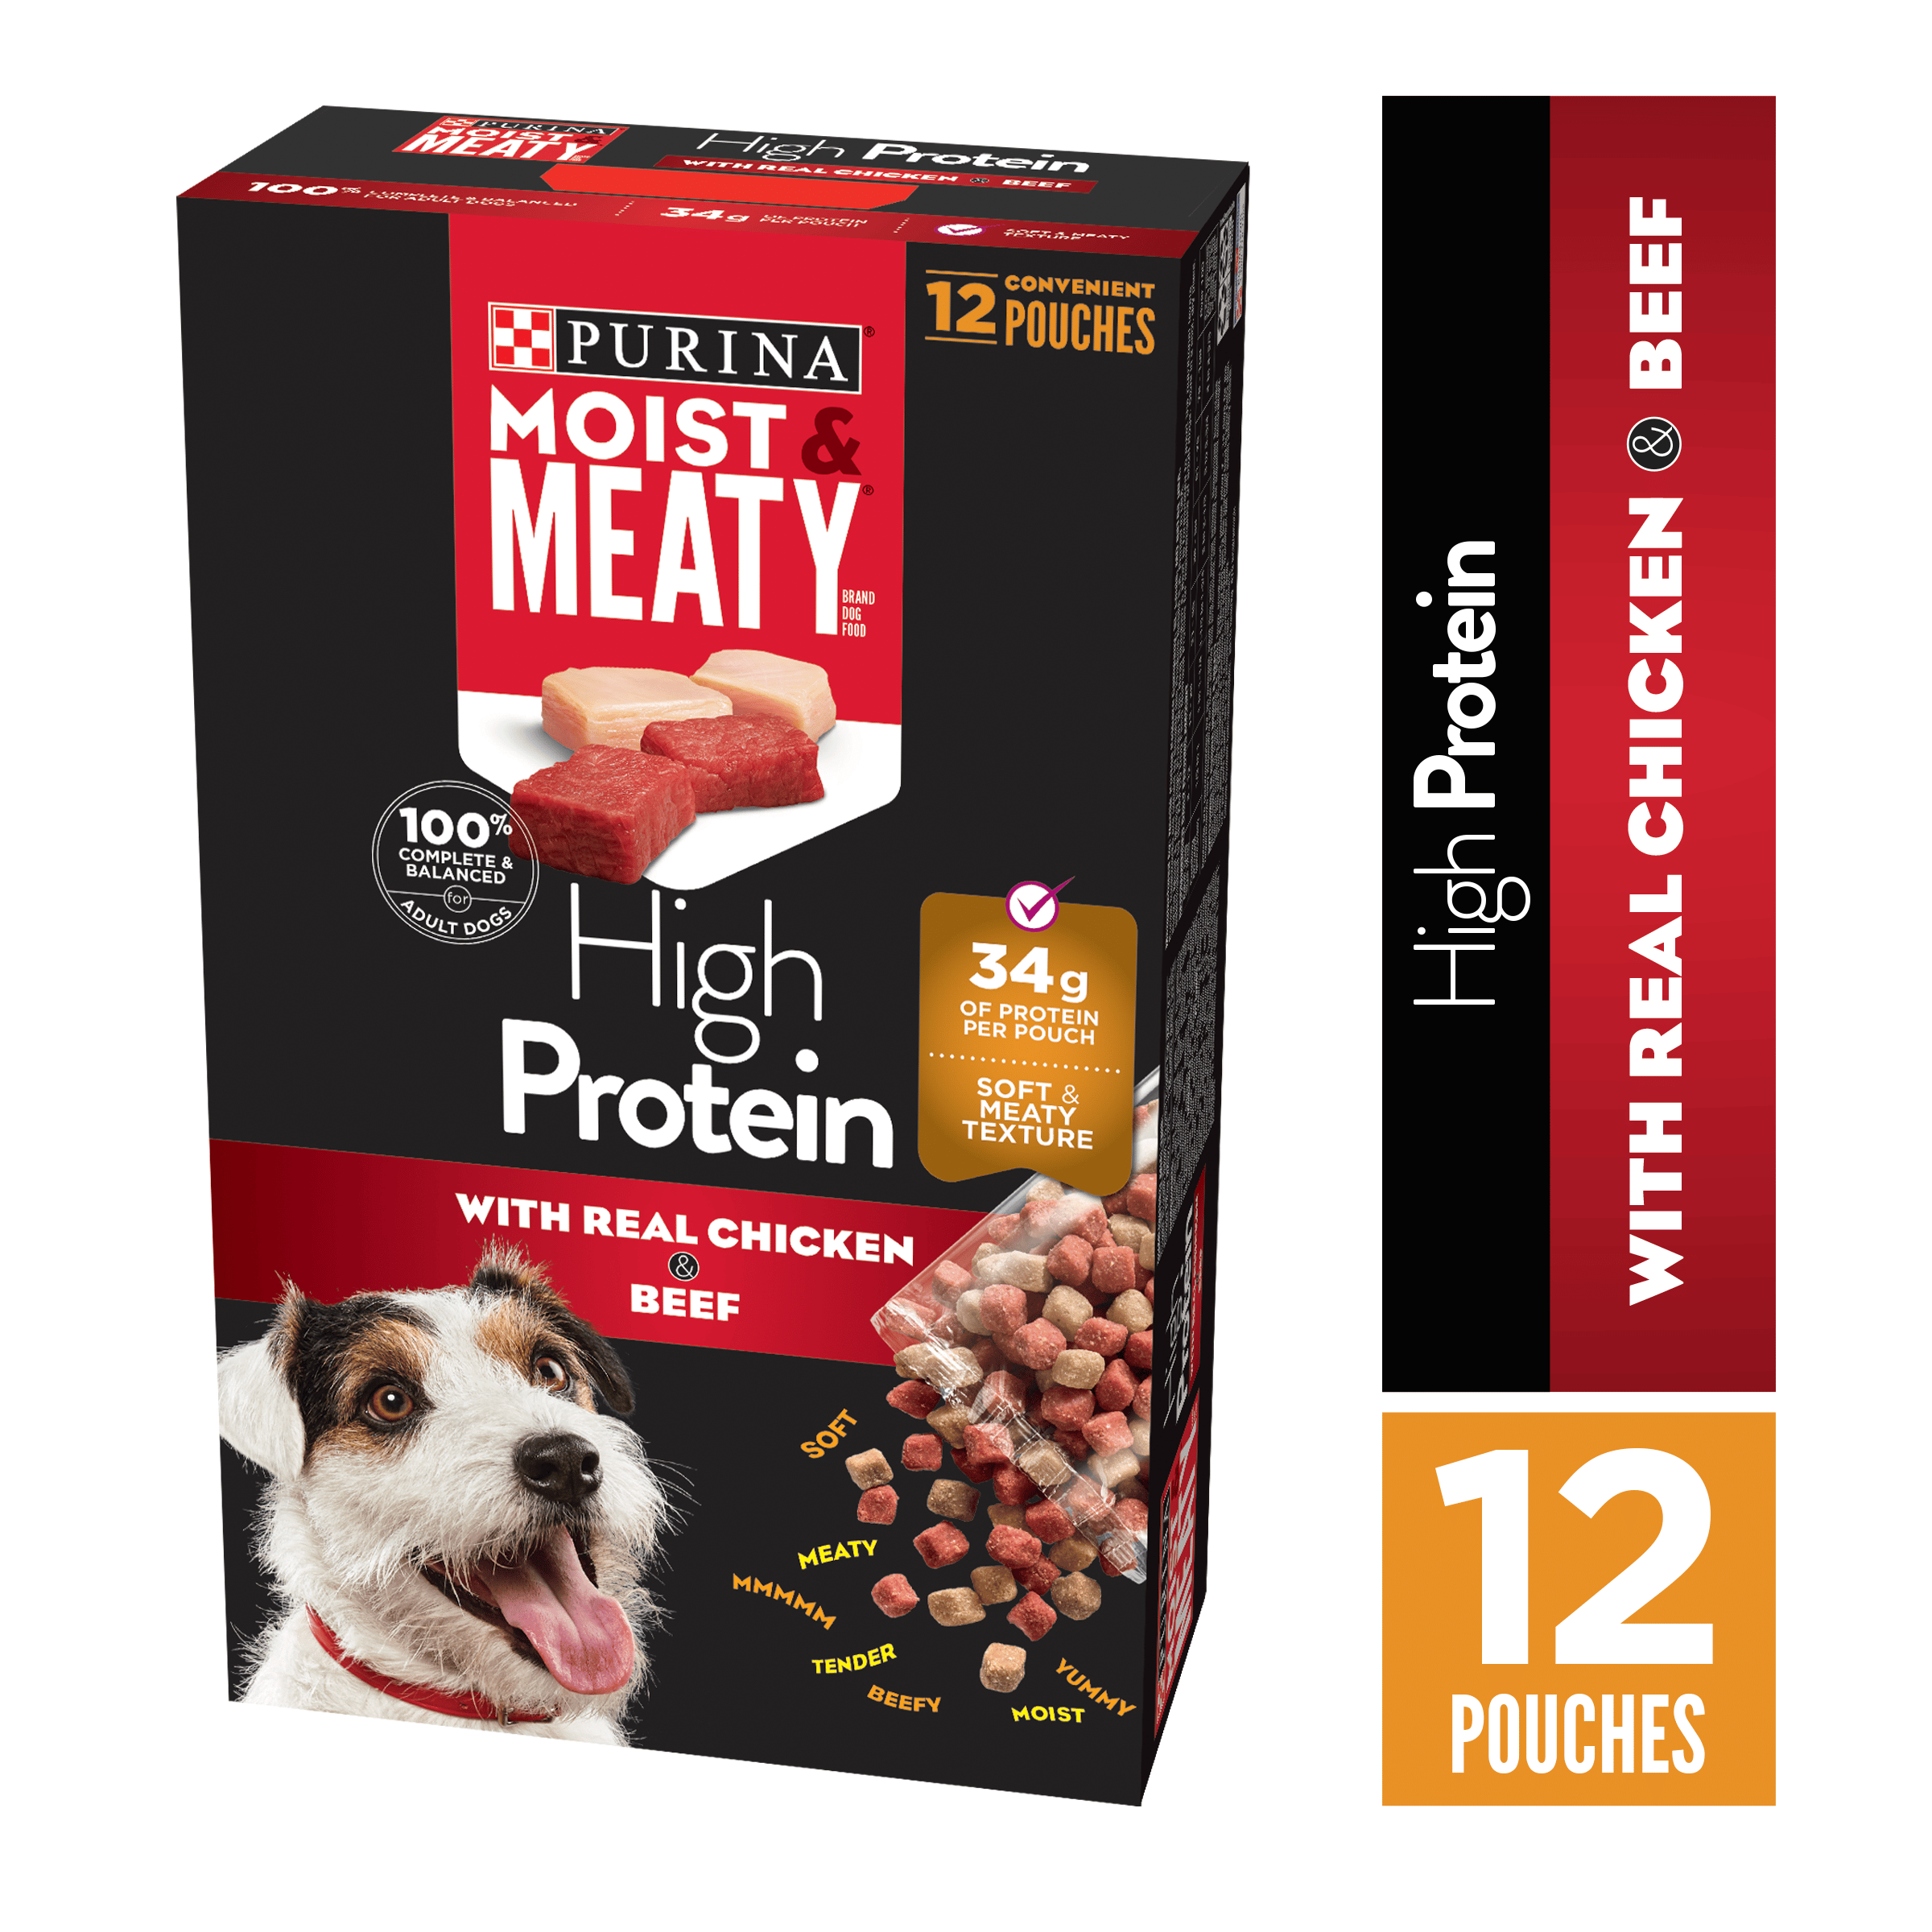 Purina Moist &  Meaty High Protein Dry Dog Food, High Protein With Real ...